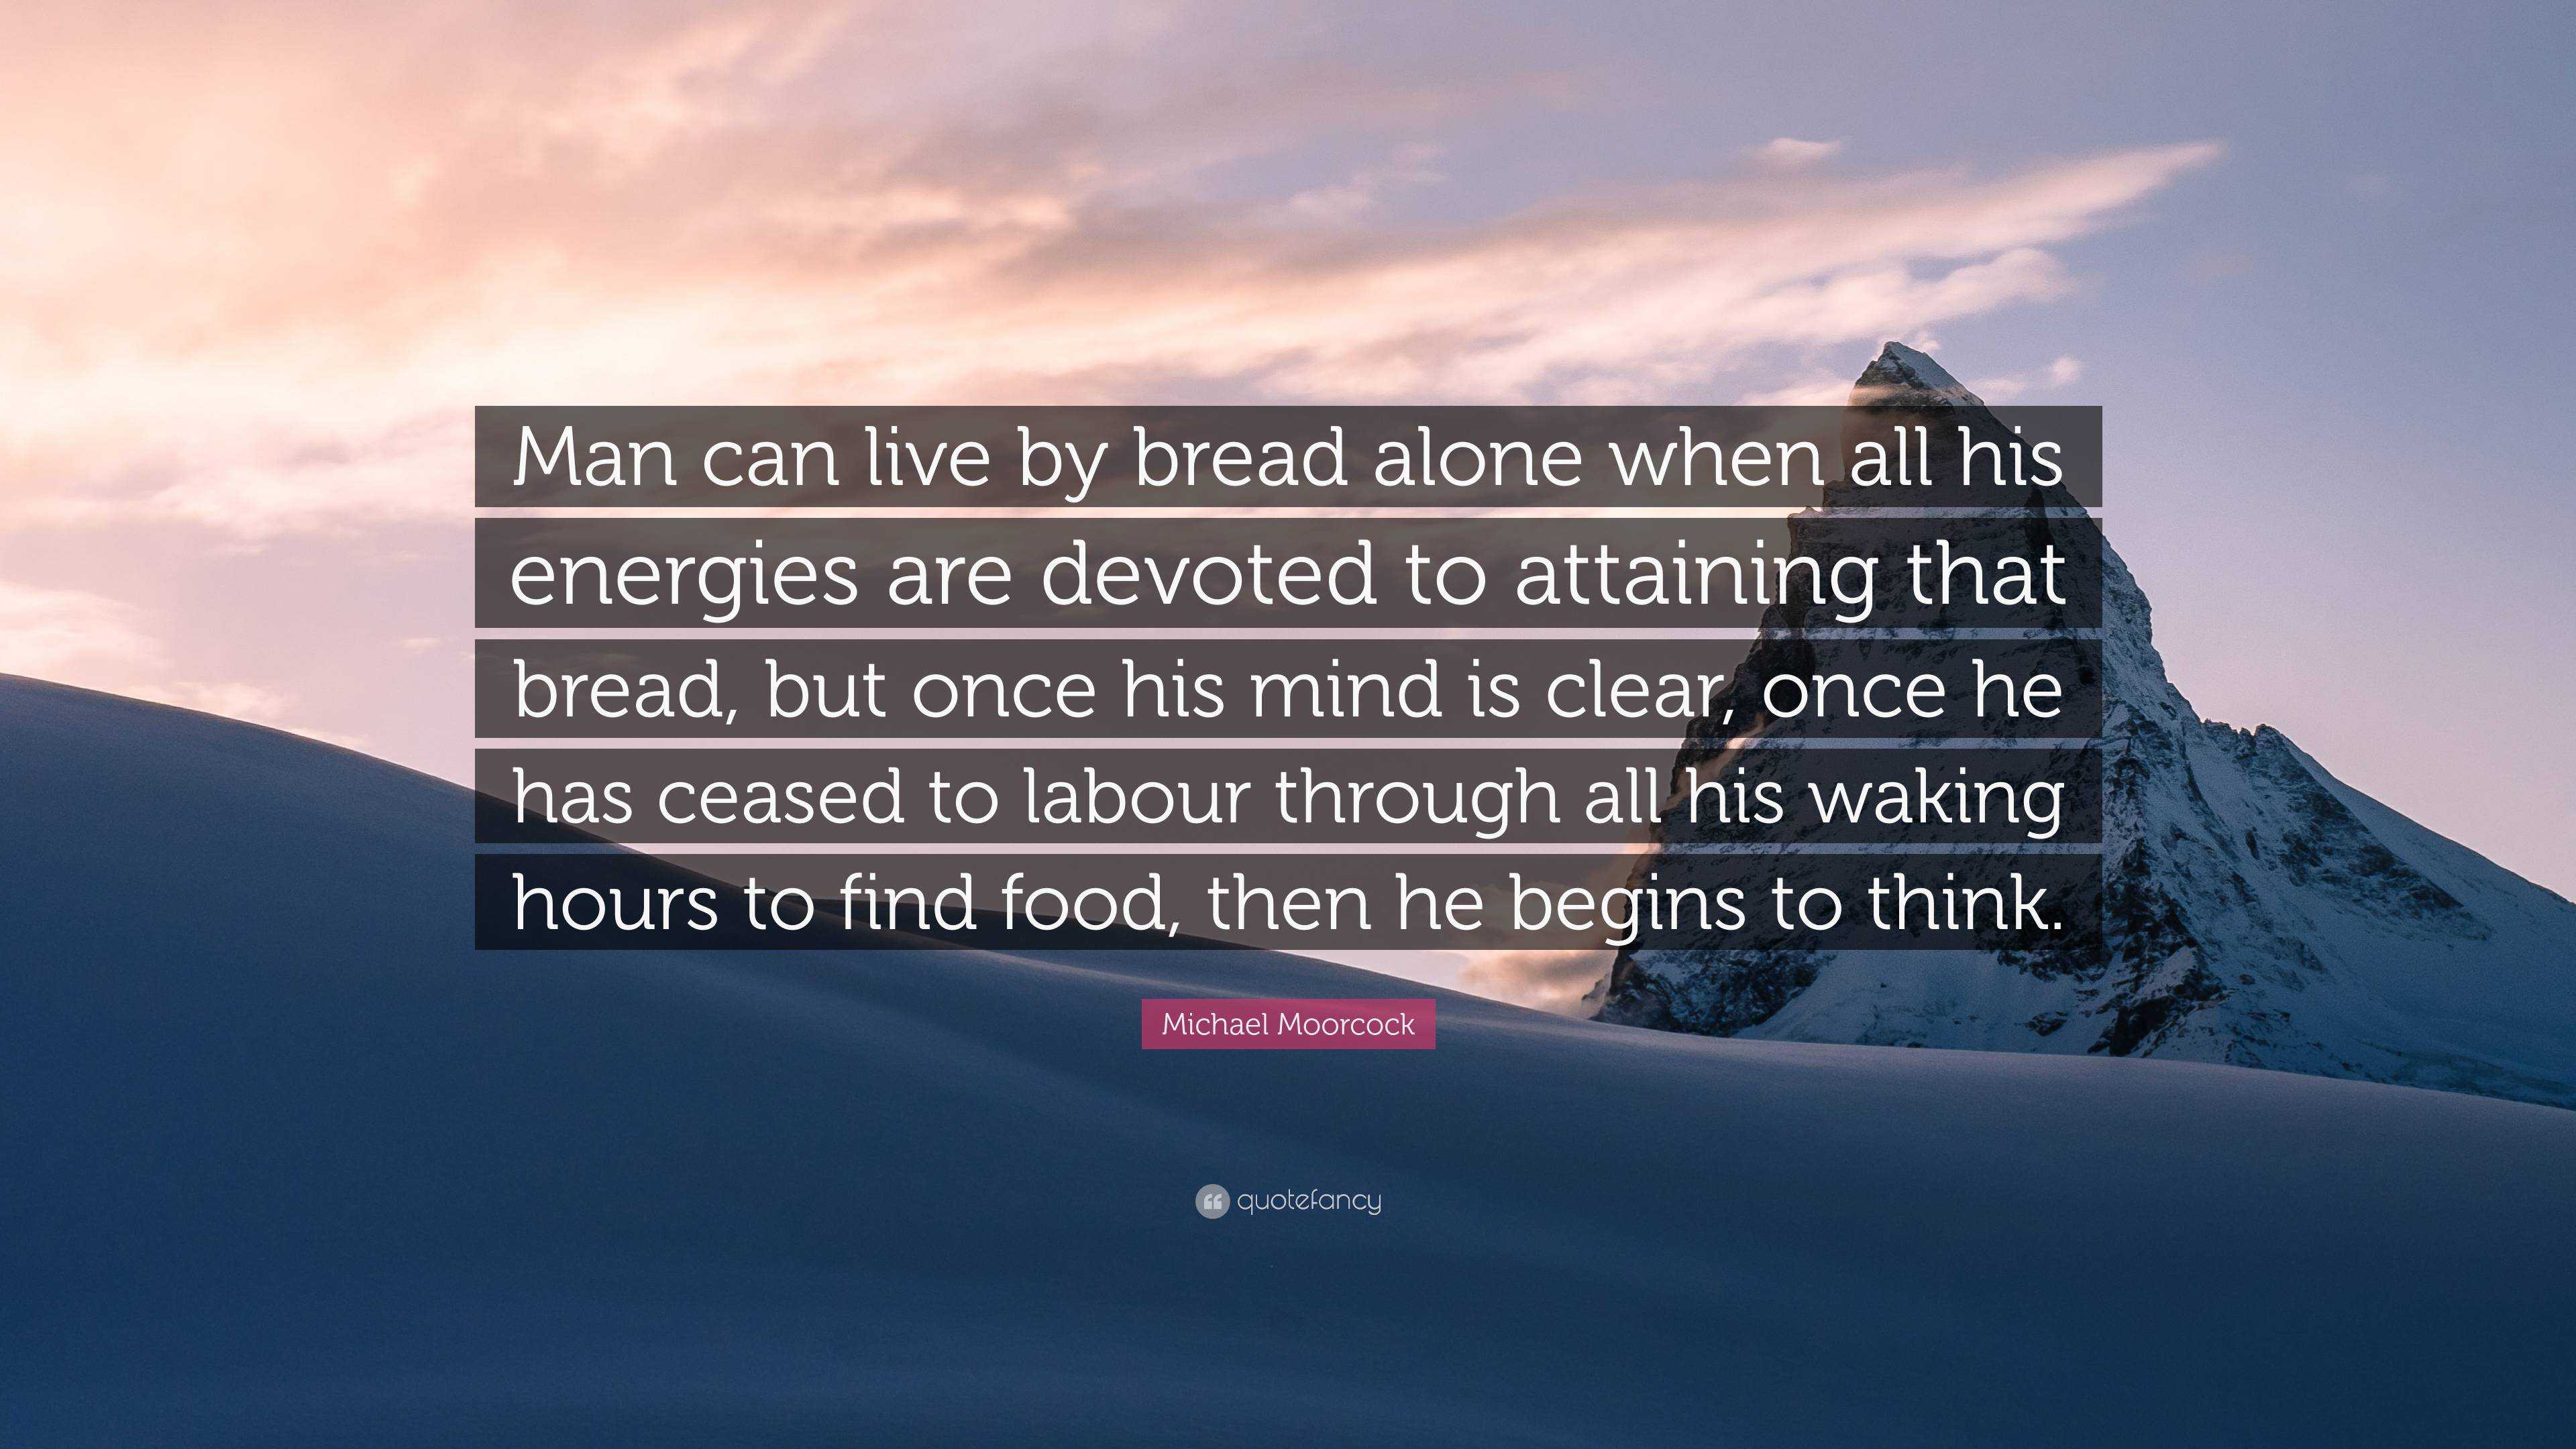 Michael Moorcock Quote “man Can Live By Bread Alone When All His Energies Are Devoted To